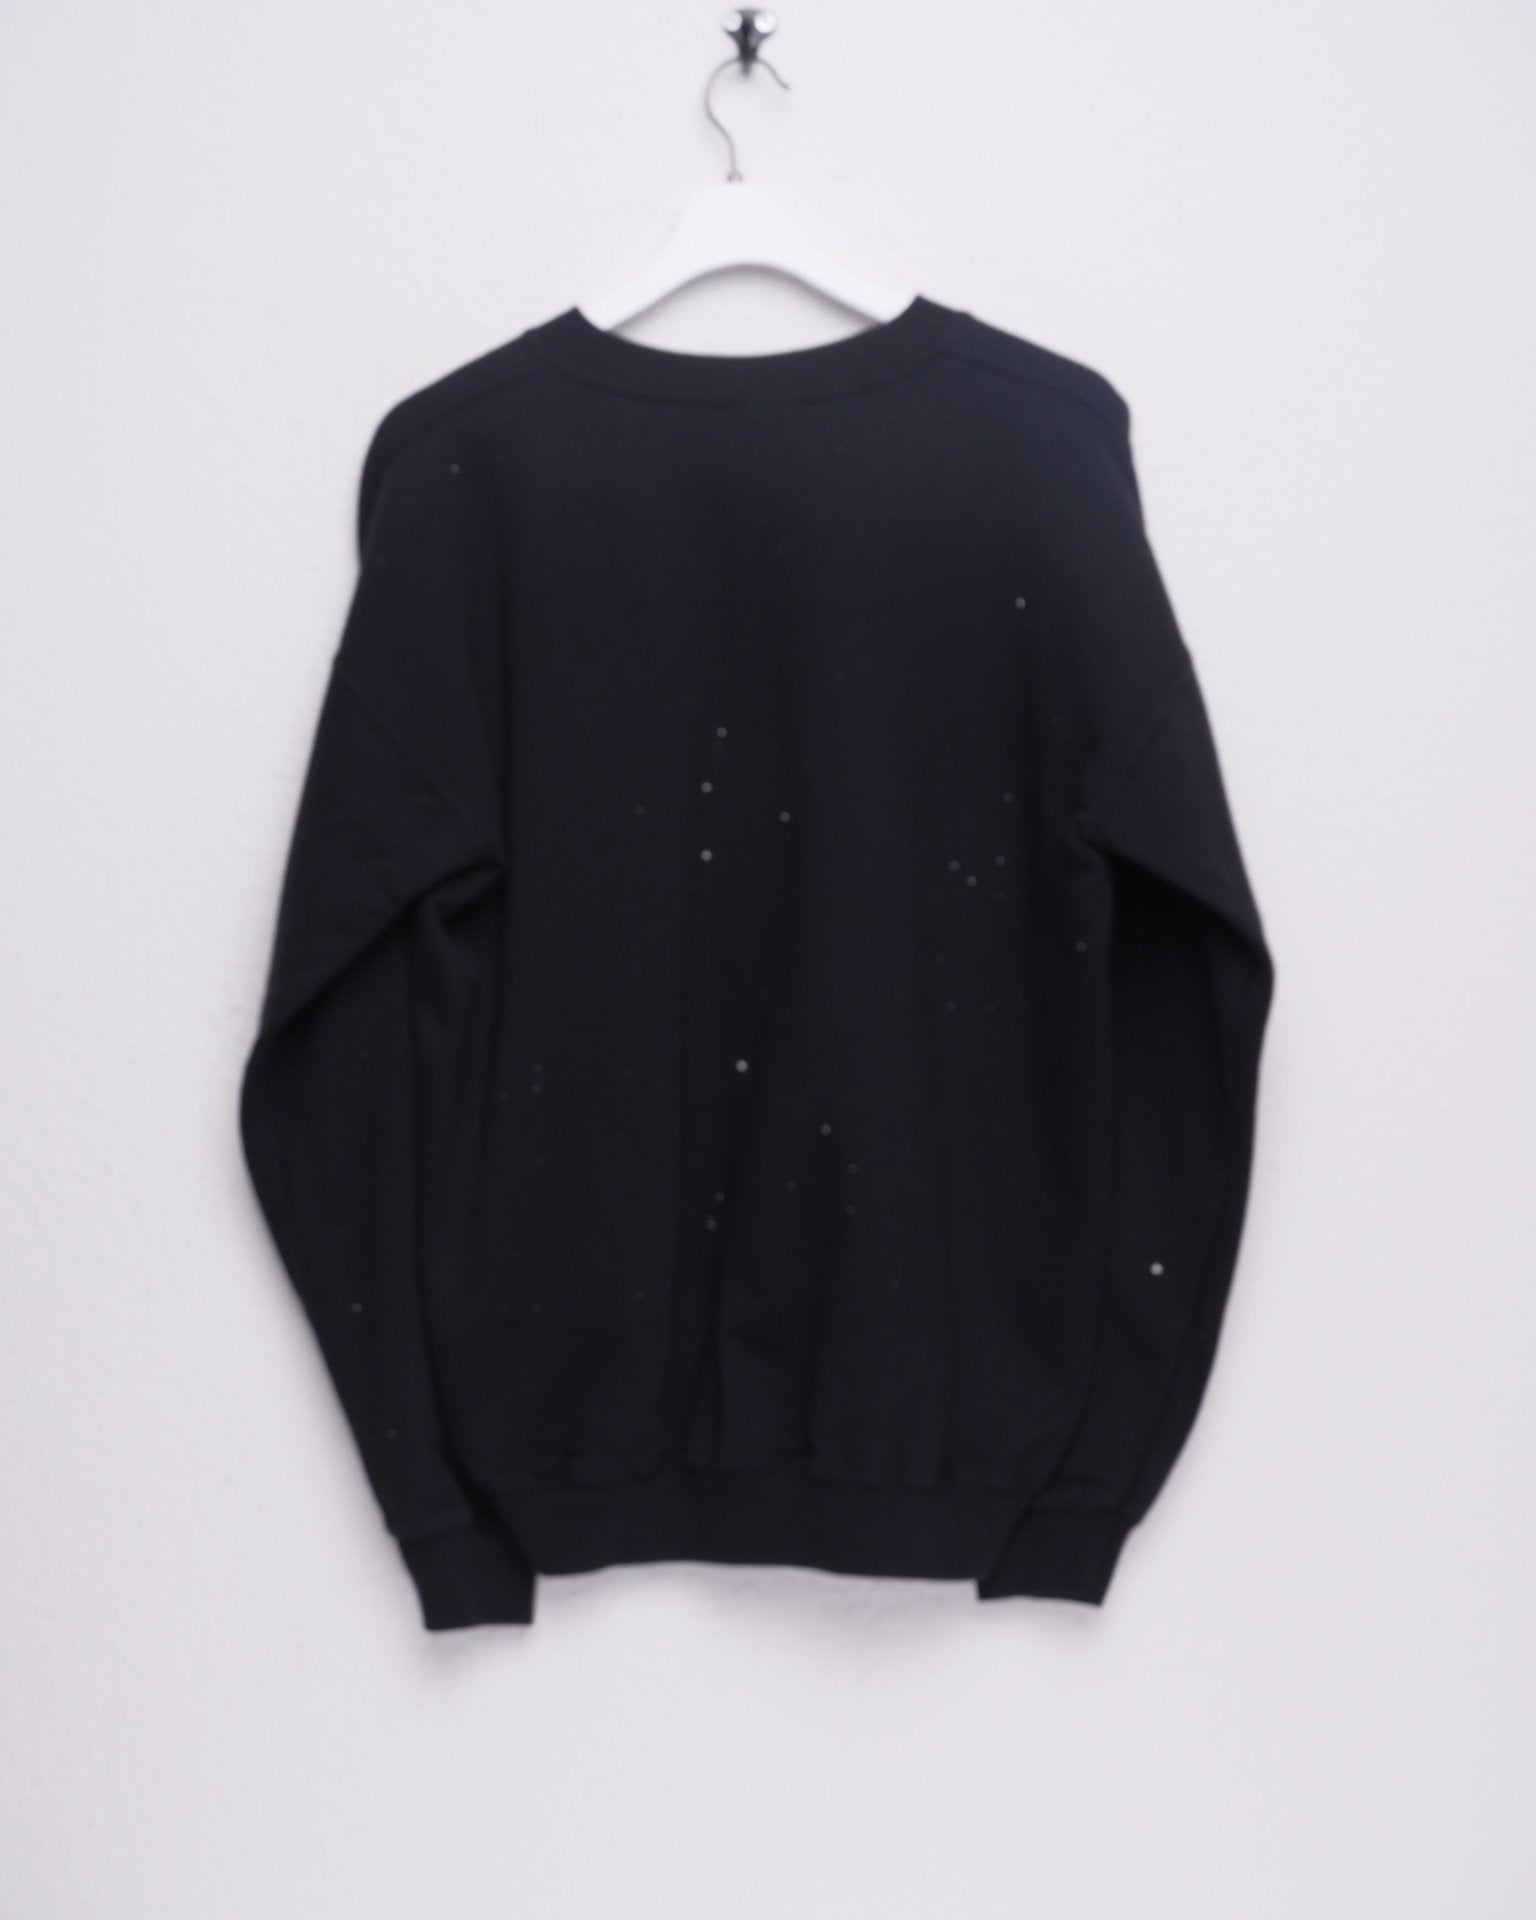 Fire & Ice embroidered Logo black Sweater - Peeces